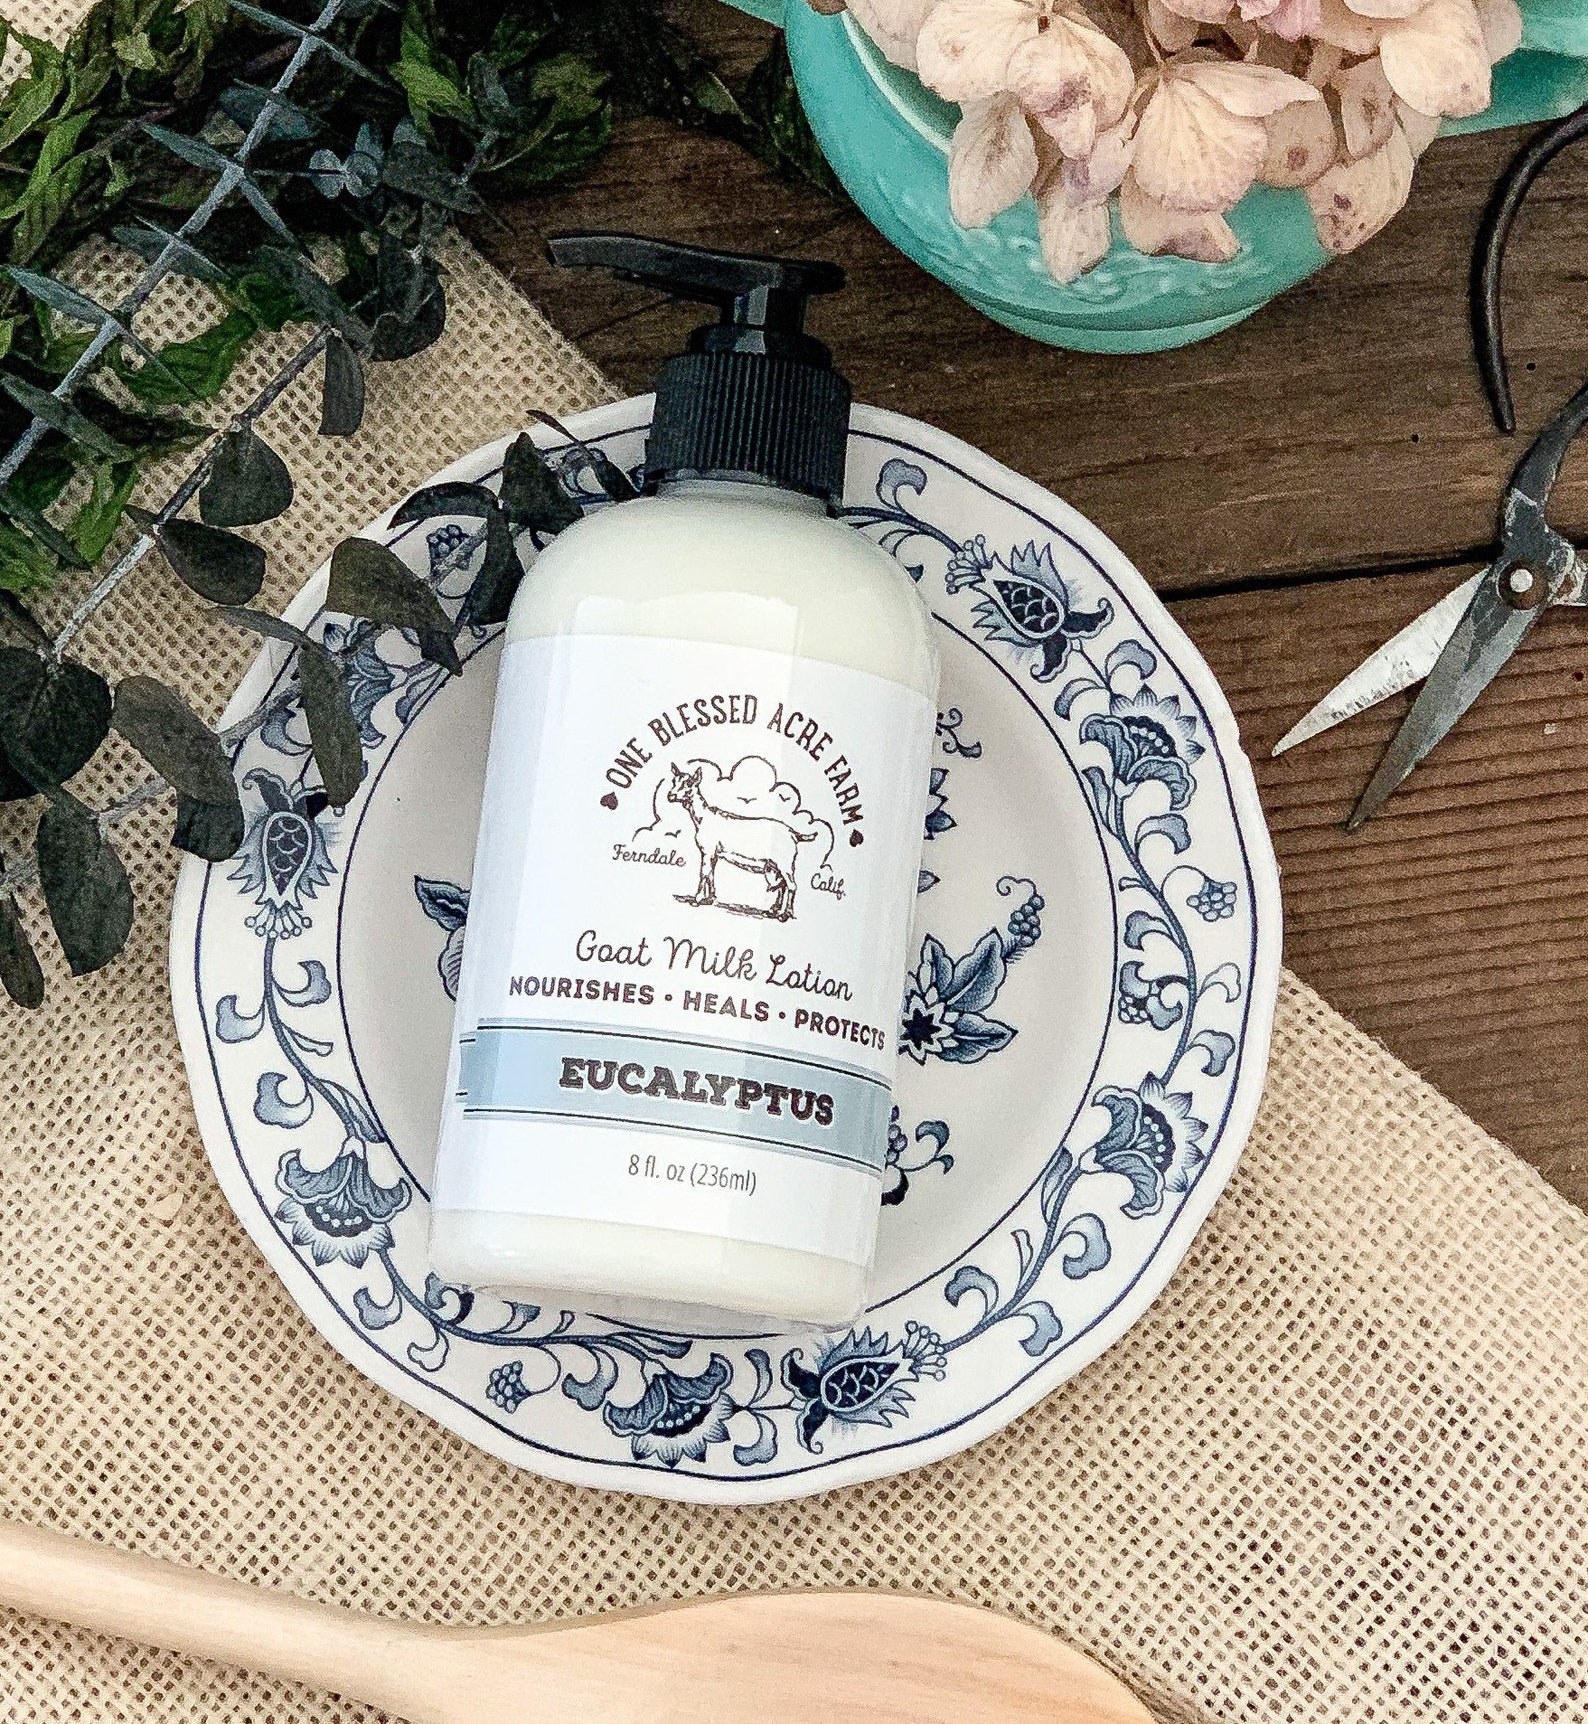 Eucalyptus Goat Milk Lotion displayed on a blue and white floral plate